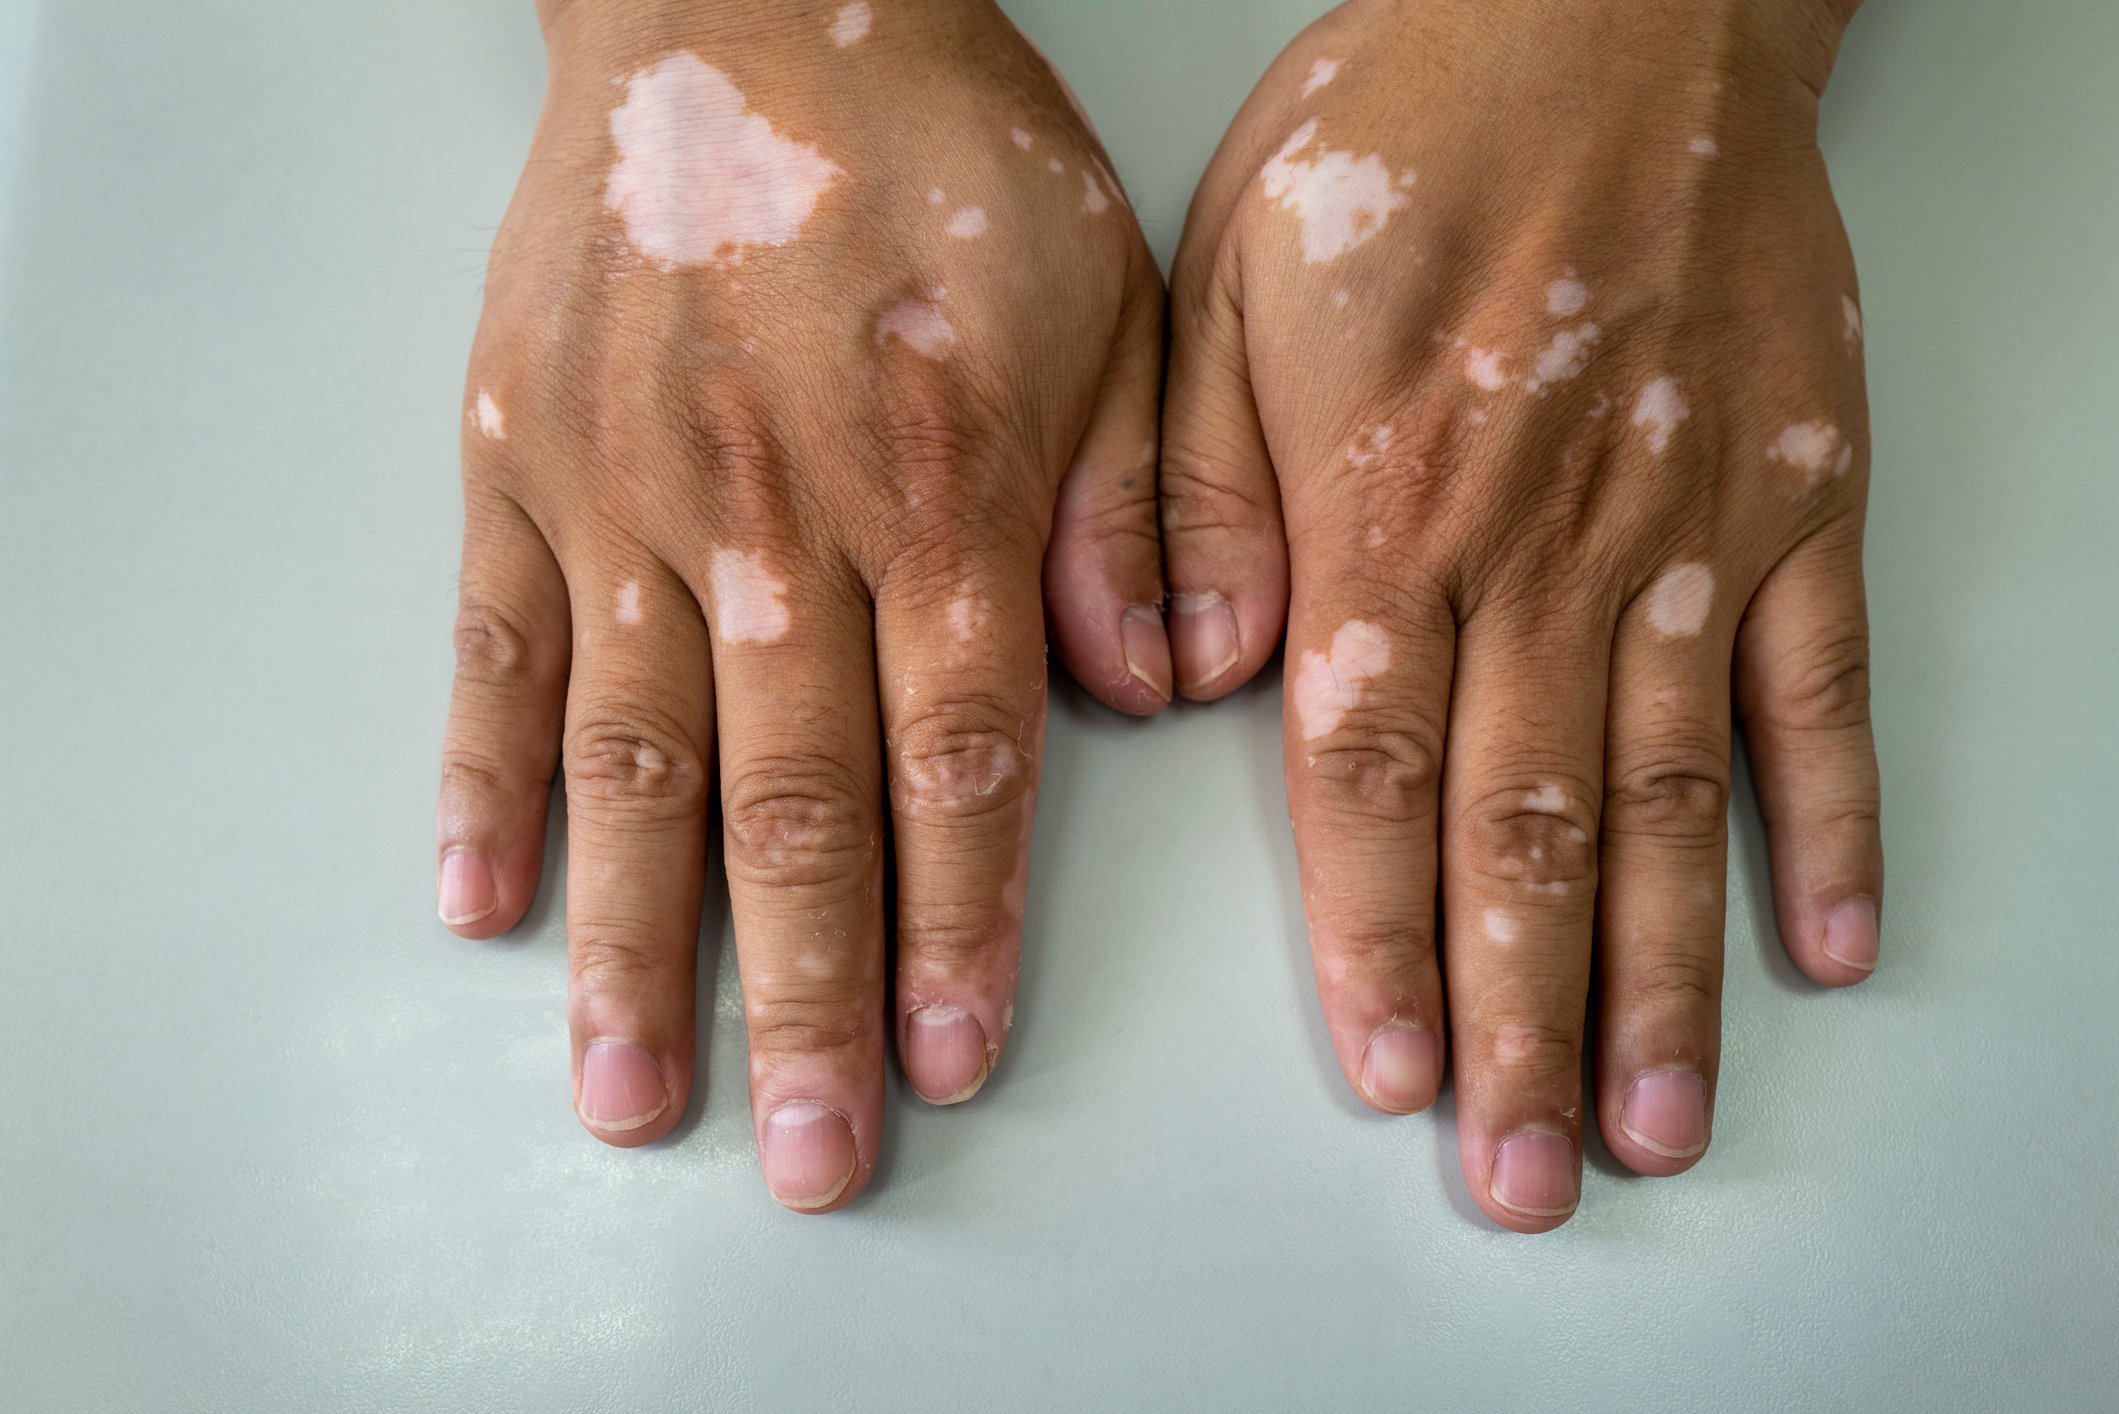 photo of a pair of hands that show the skin condition vitiligo